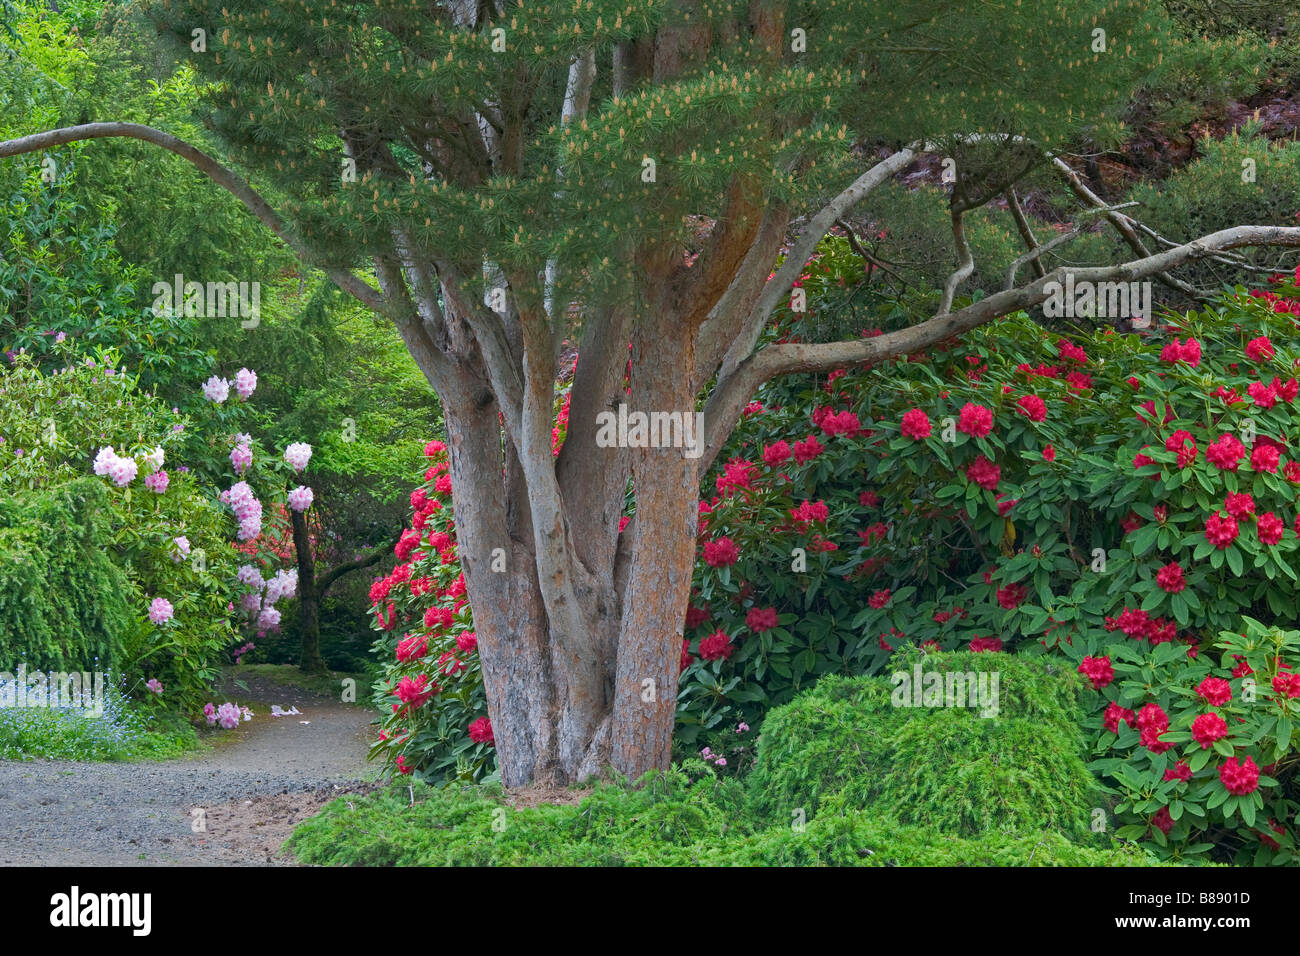 Seattle WA Kubota Garden city park a multi trunked pine and flowering rhododendron protect a hidden path Stock Photo